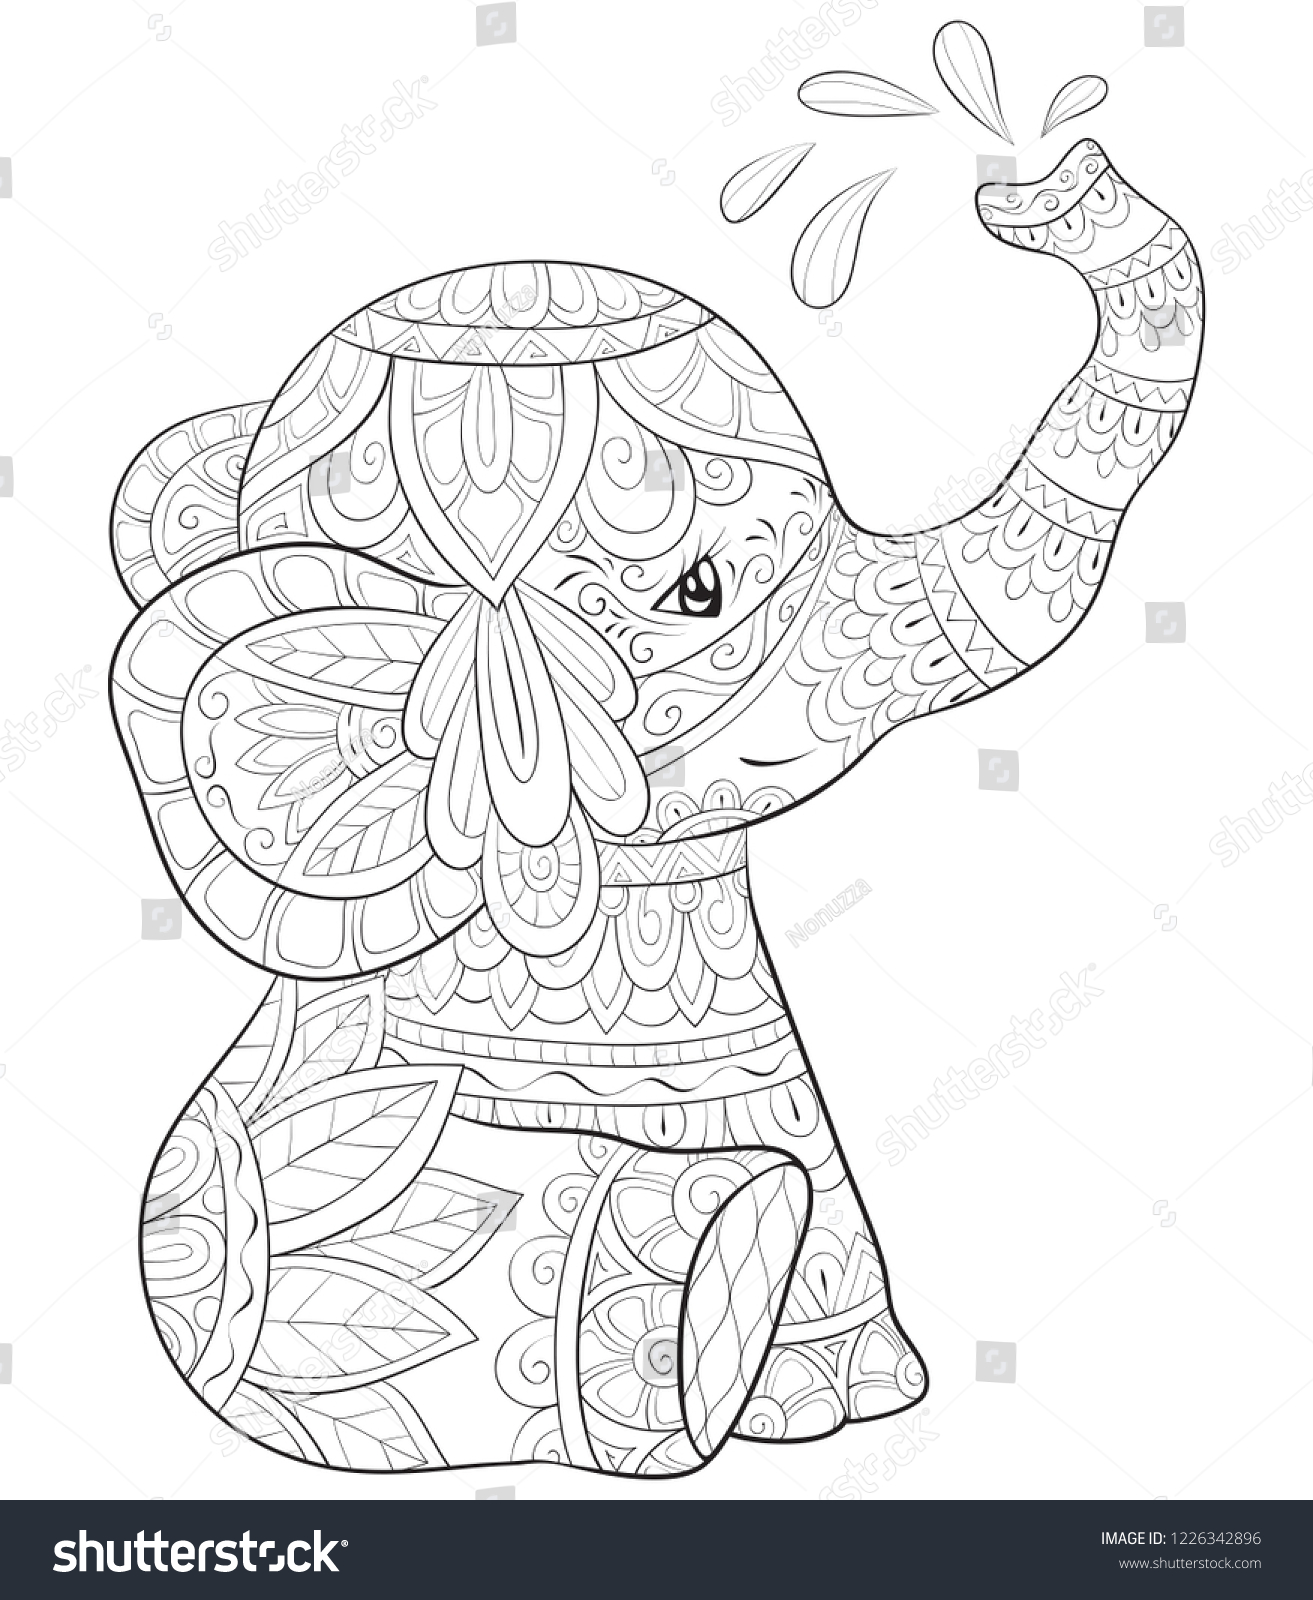 Adult Coloring Bookpage Cute Elephant Image Stock Vector Royalty Free 1226342896